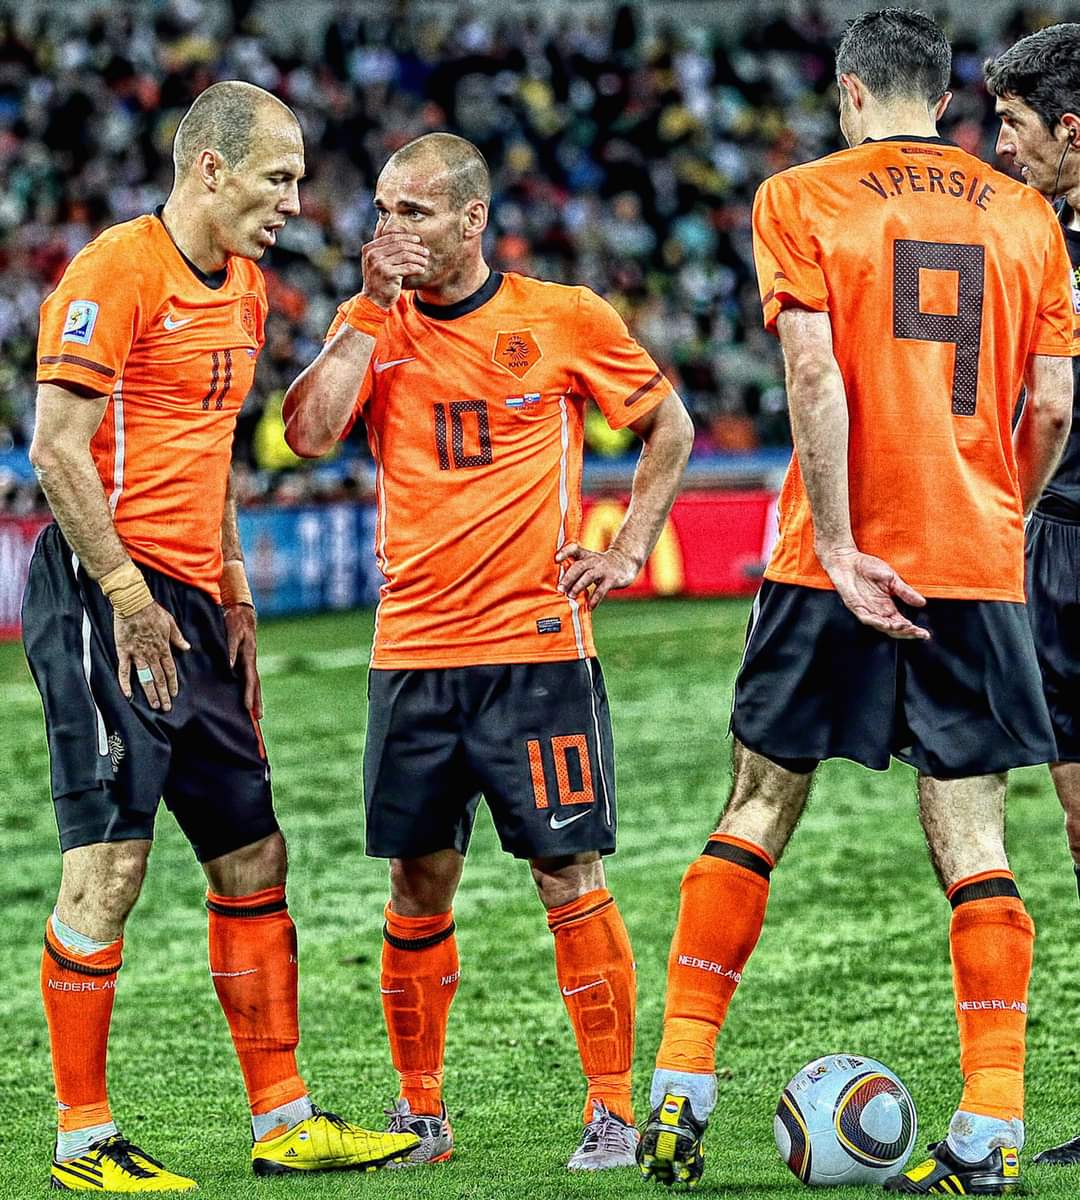 One of the best trios of all time. 👏🔥 Netherlands was truly blessed! 🇳🇱❤️